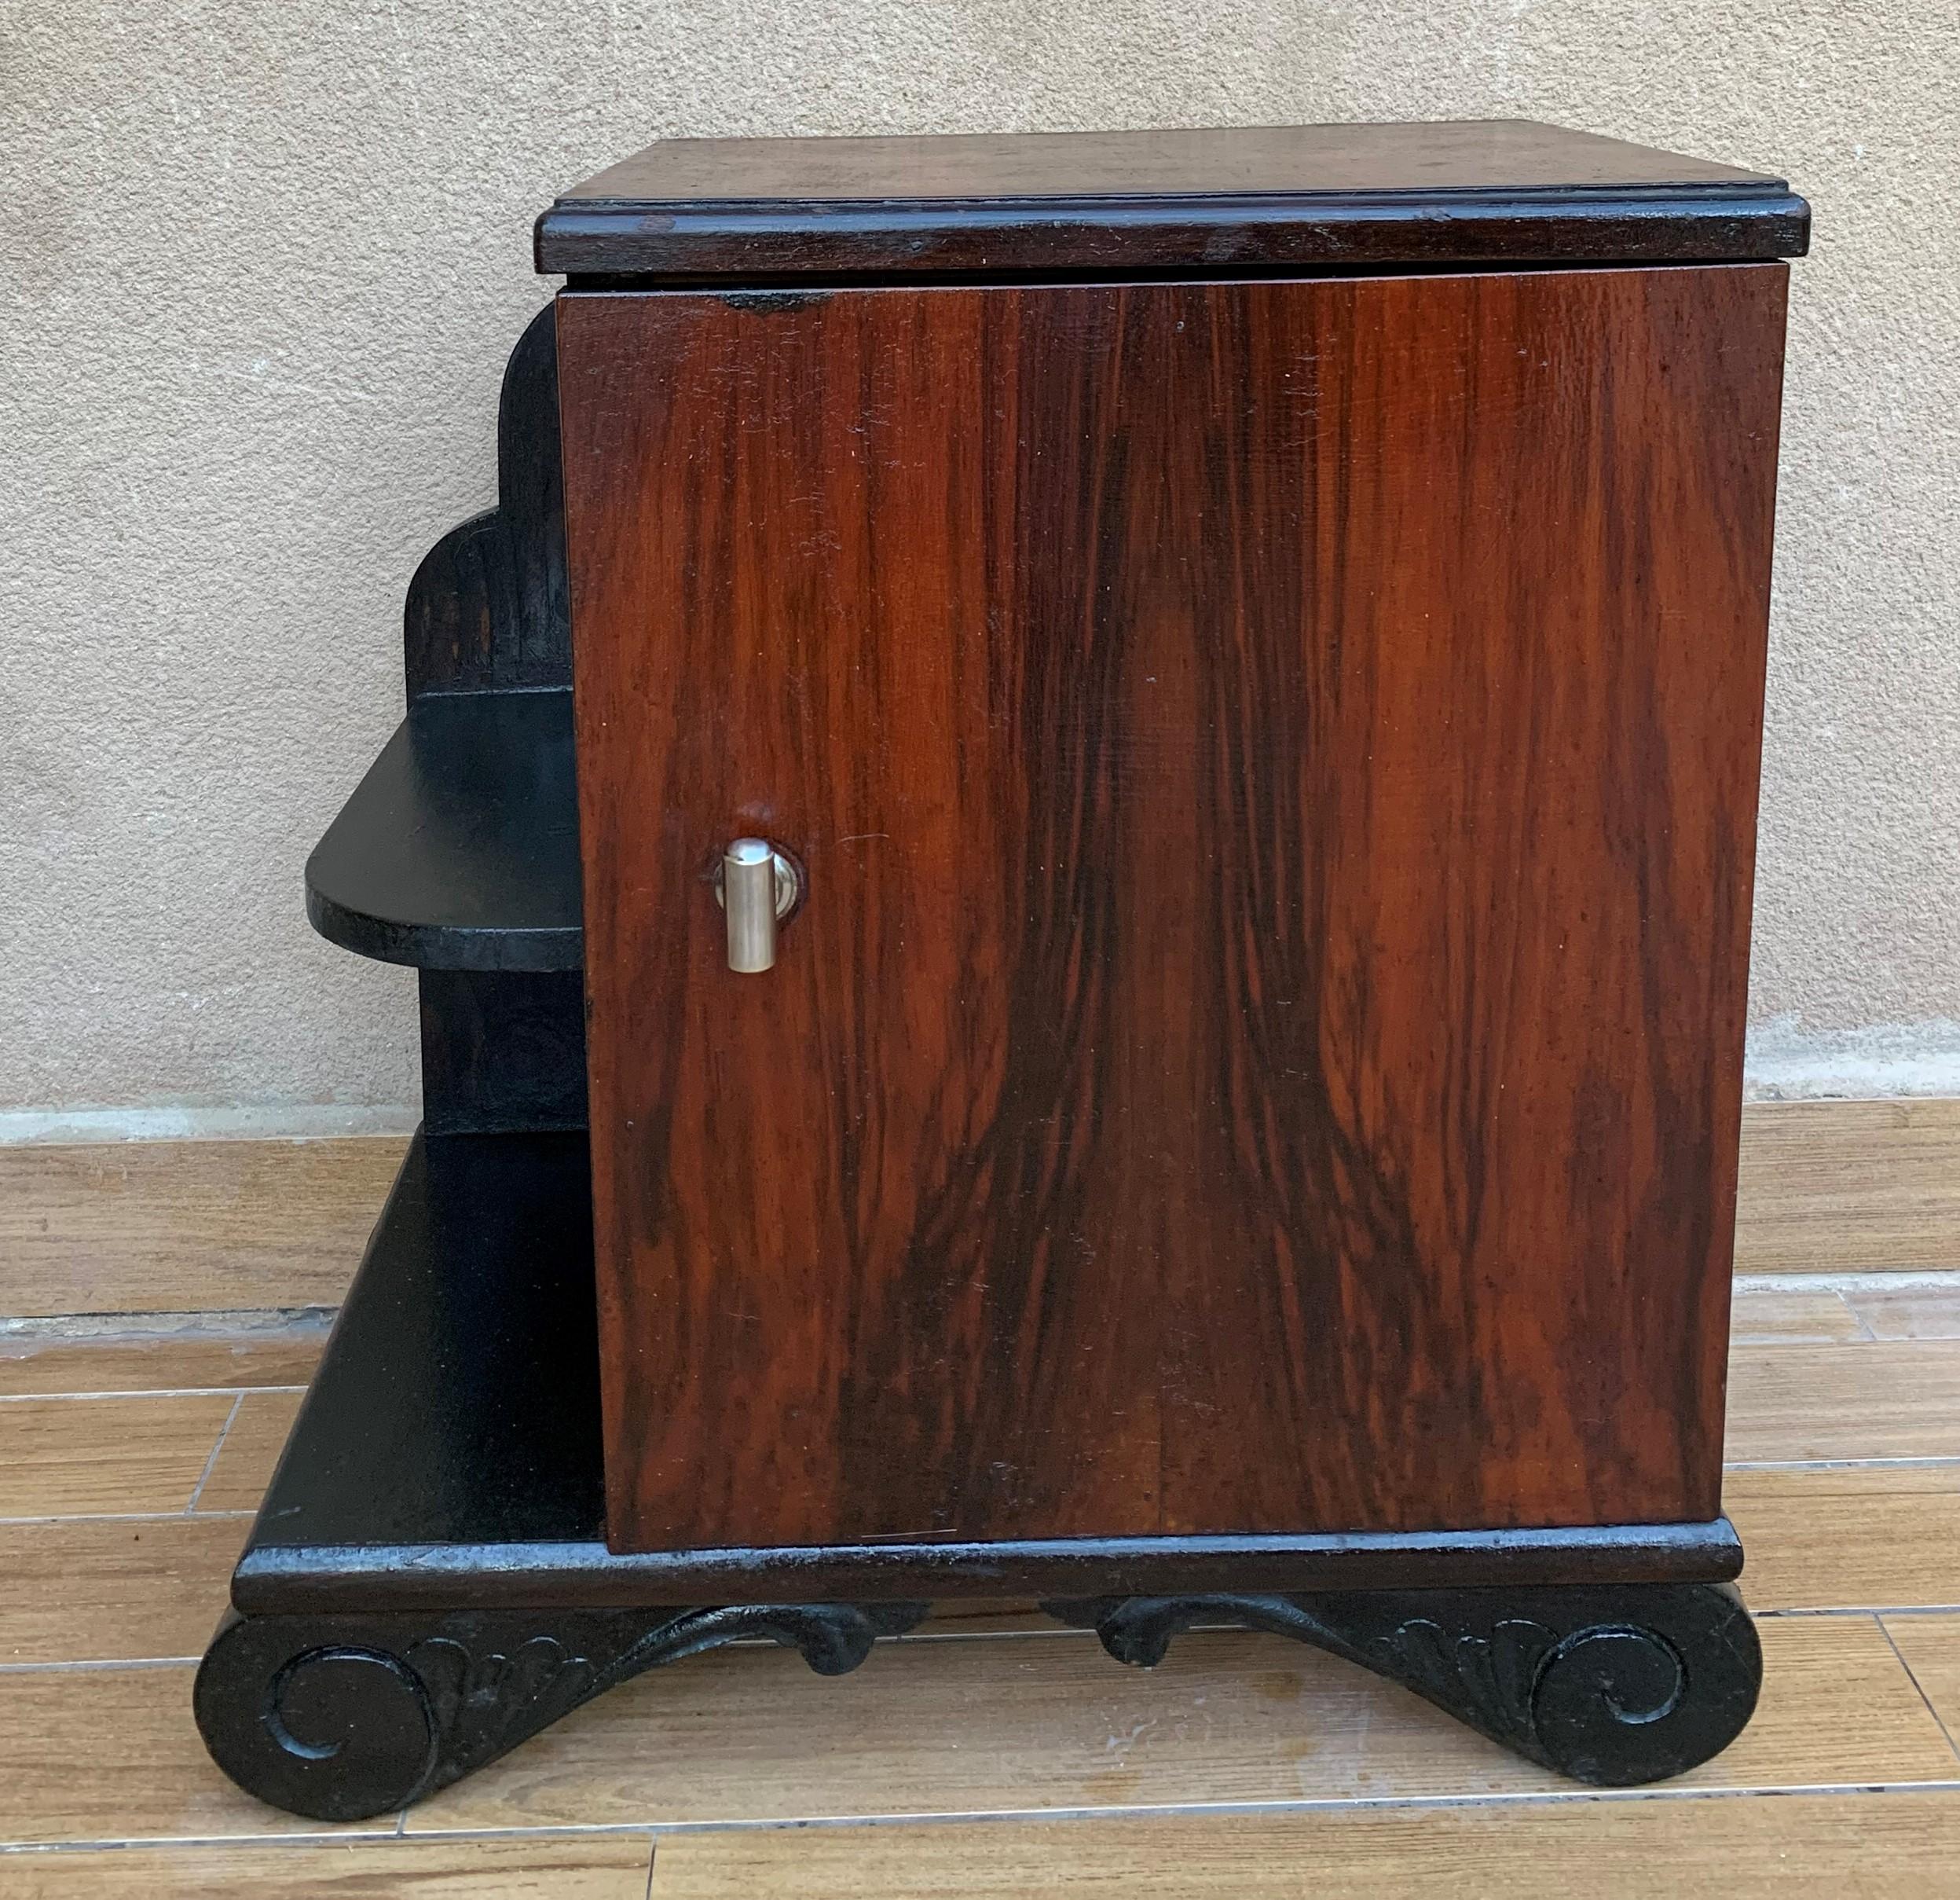 This pair of circa 1930s French Art Deco side cabinets could be used to flank a sofa or as nightstands. Each has a storage compartment with hinged door and narrow open shelves at the sides. Cabinets are set on ebonized trestle foot at the front.